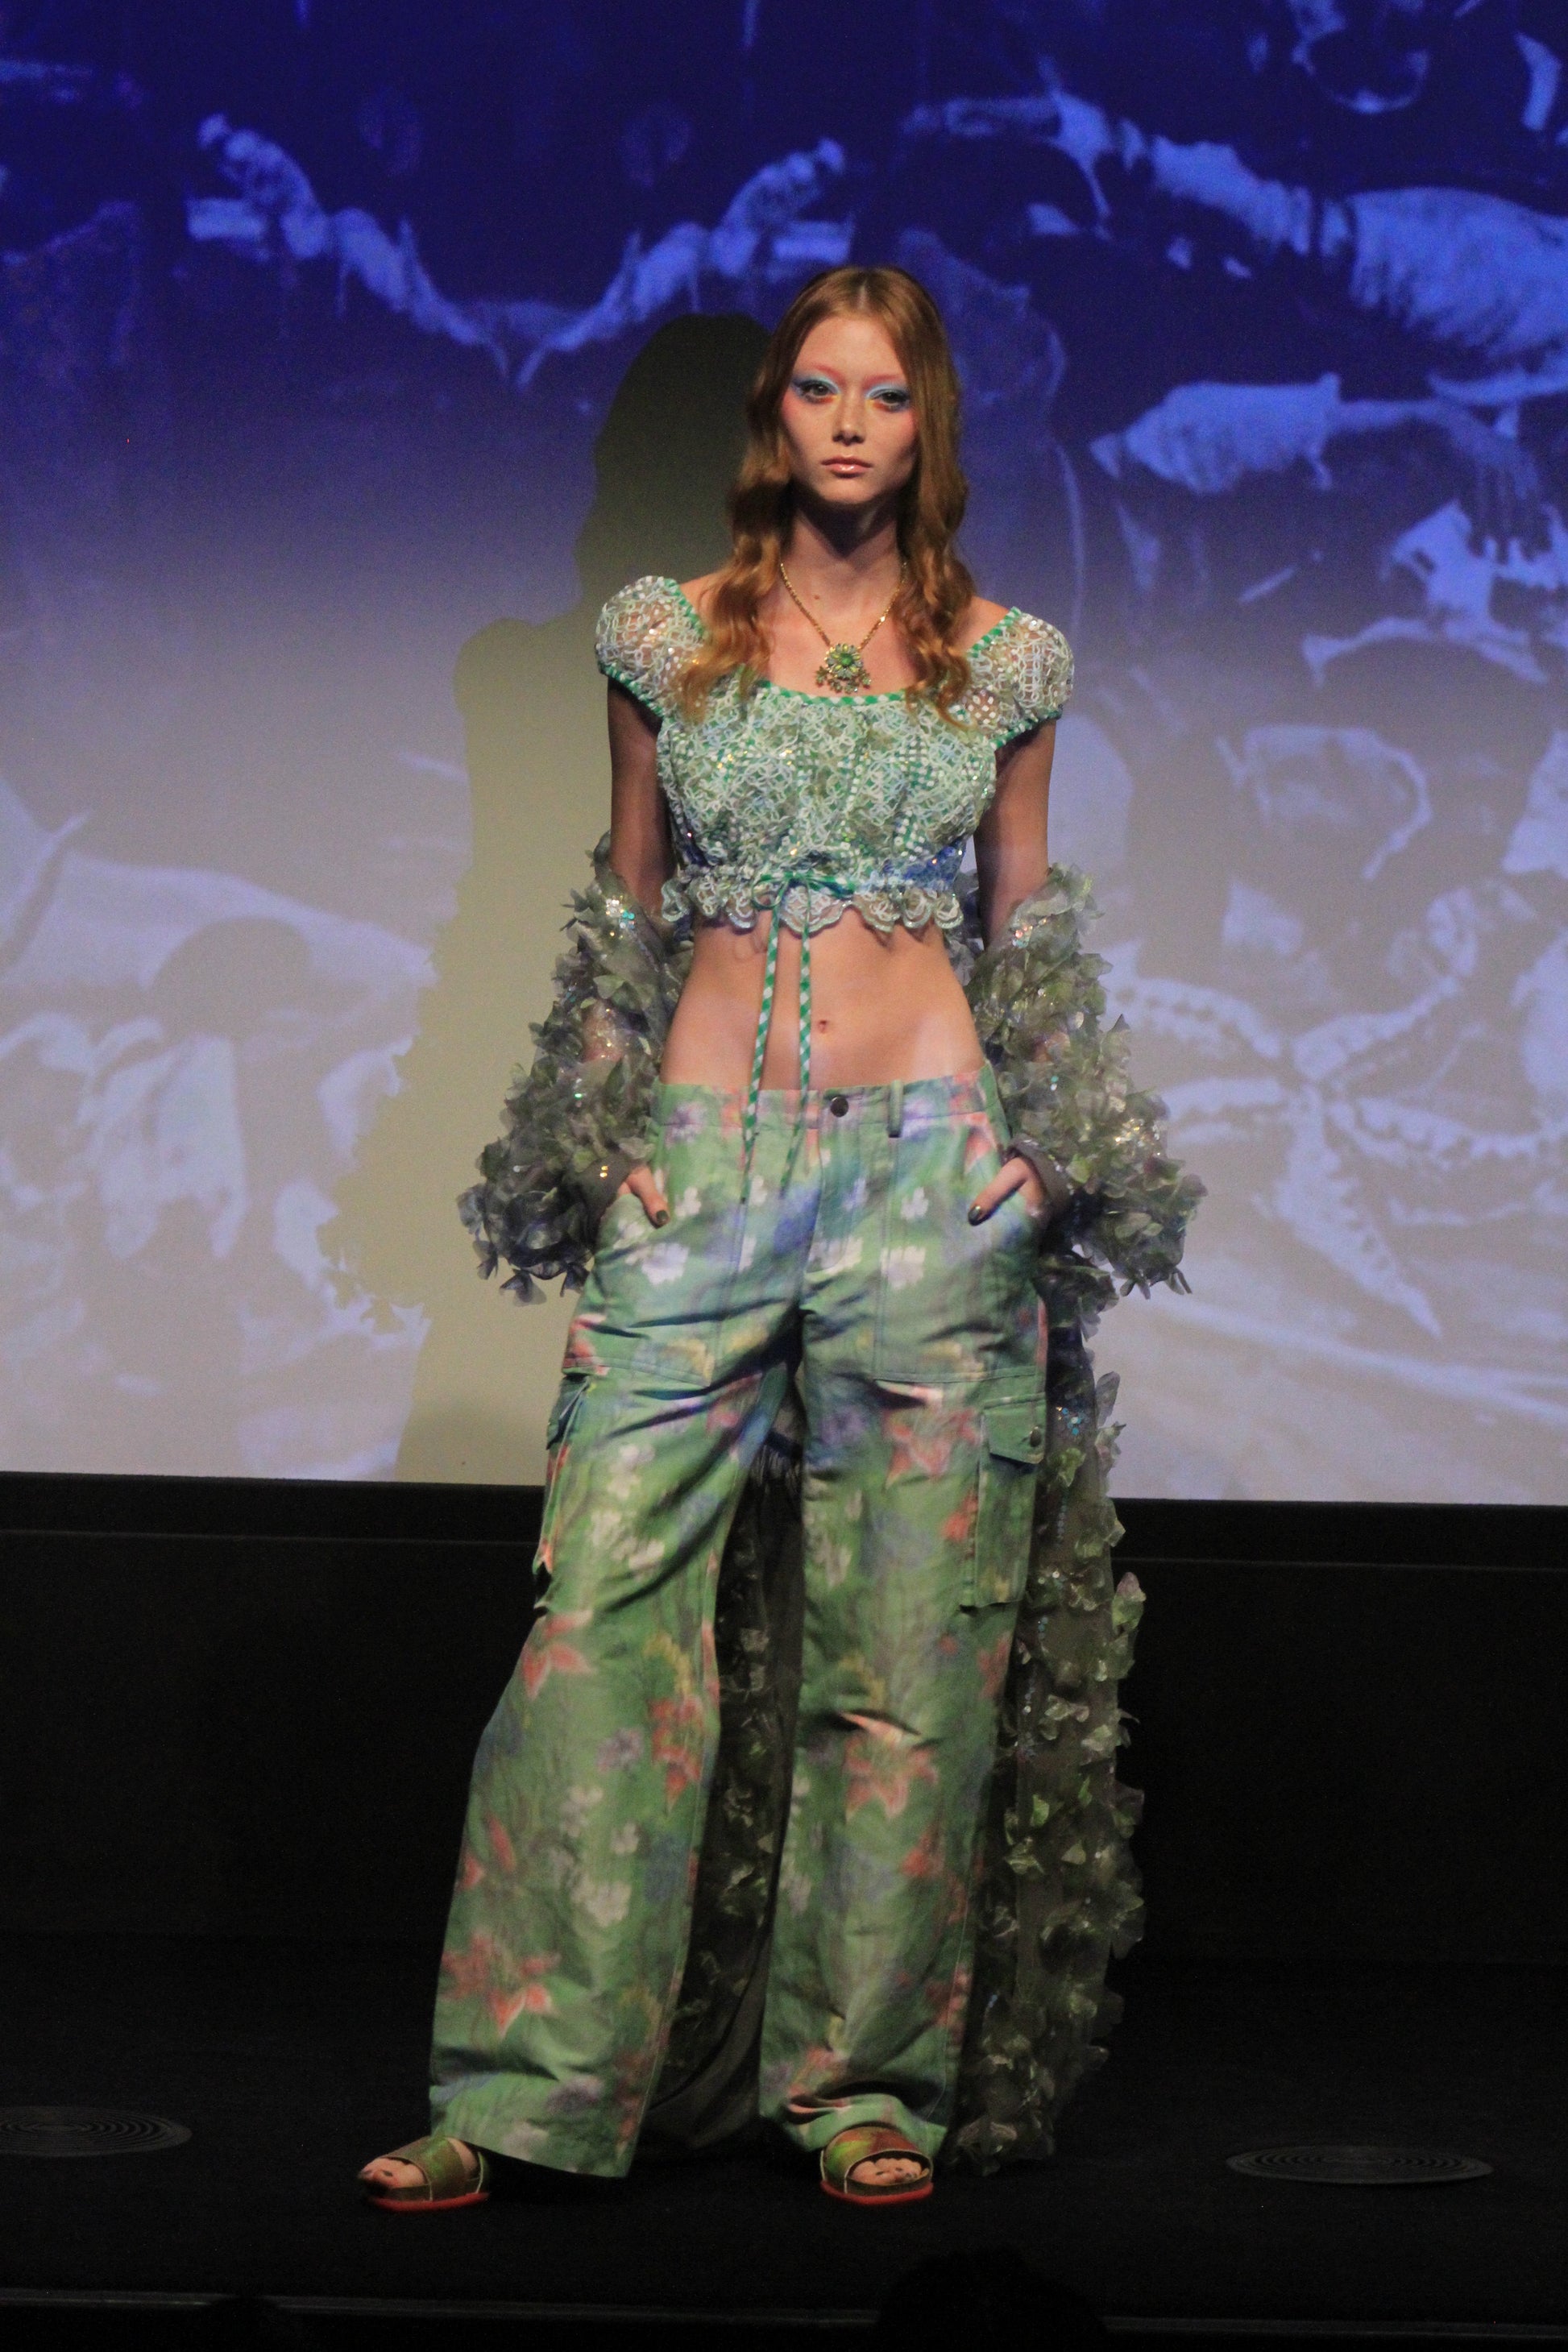 On runway light, Gingham Top, light green with a green pants, and a fluffy boa